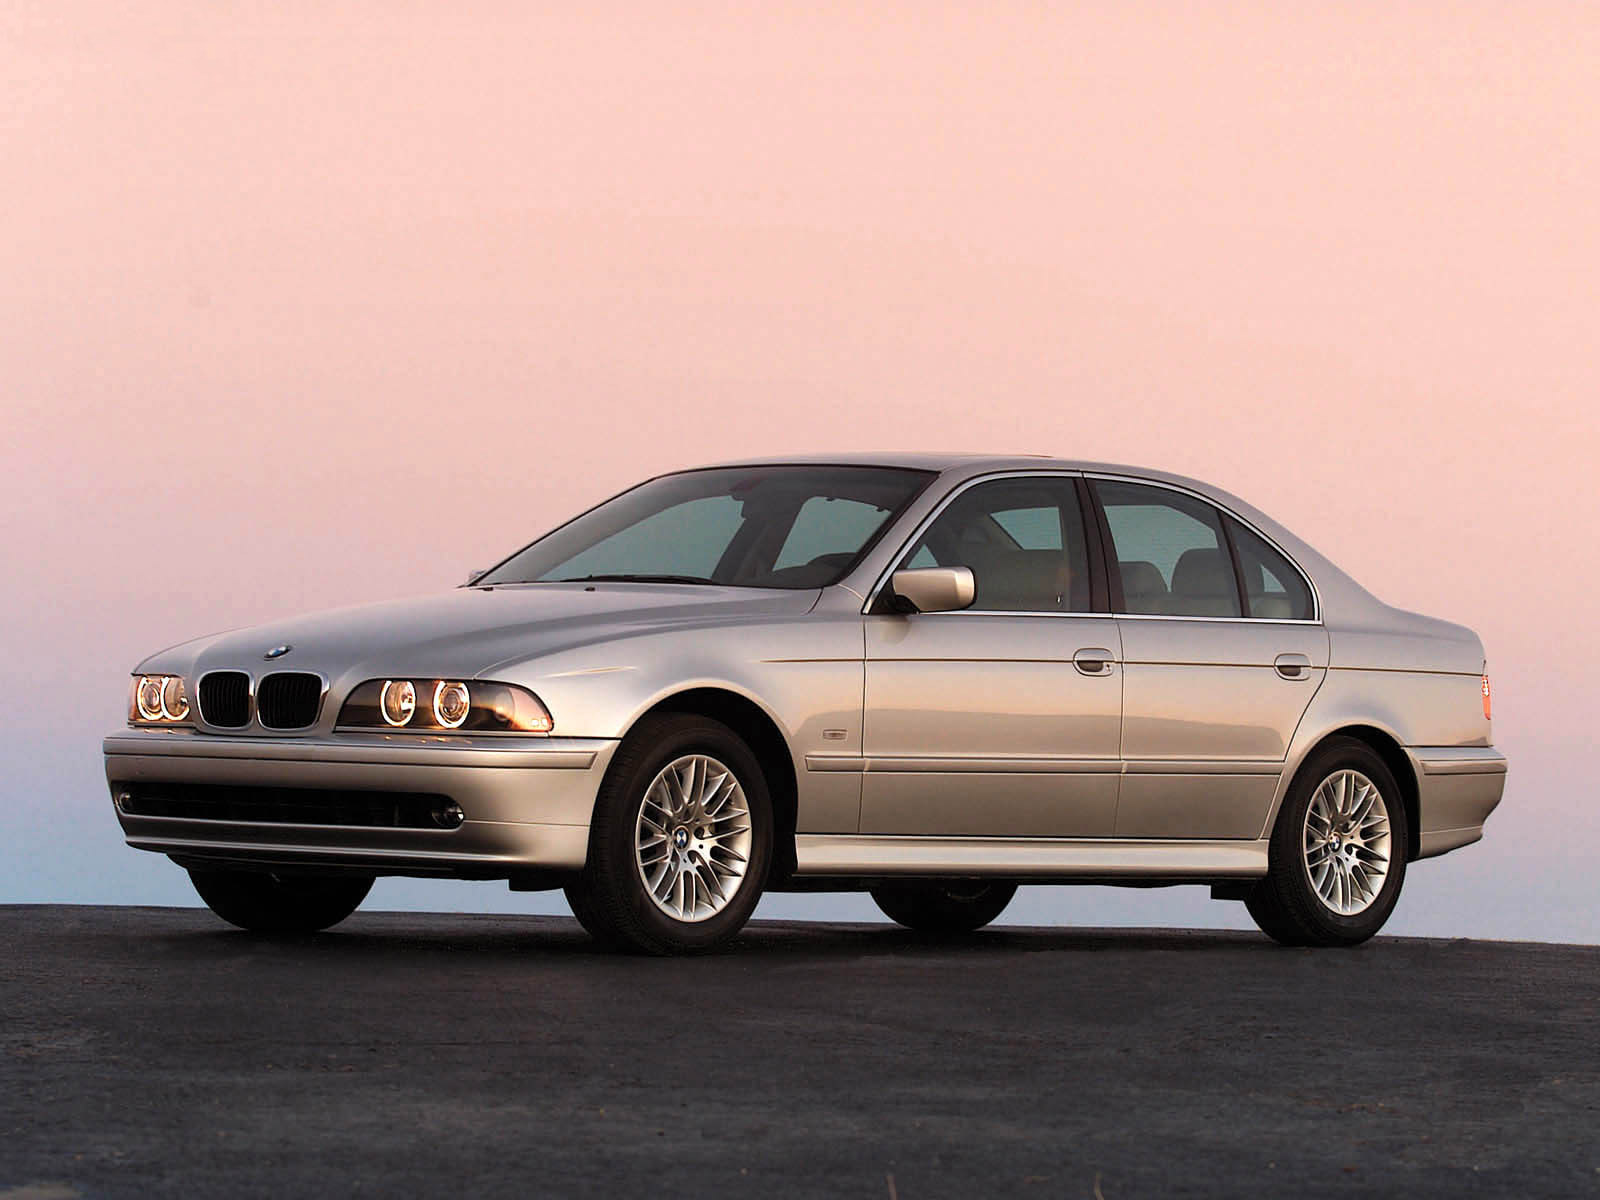 Car in pictures – car photo gallery » BMW 5-Series 530i Sedan E39 2000